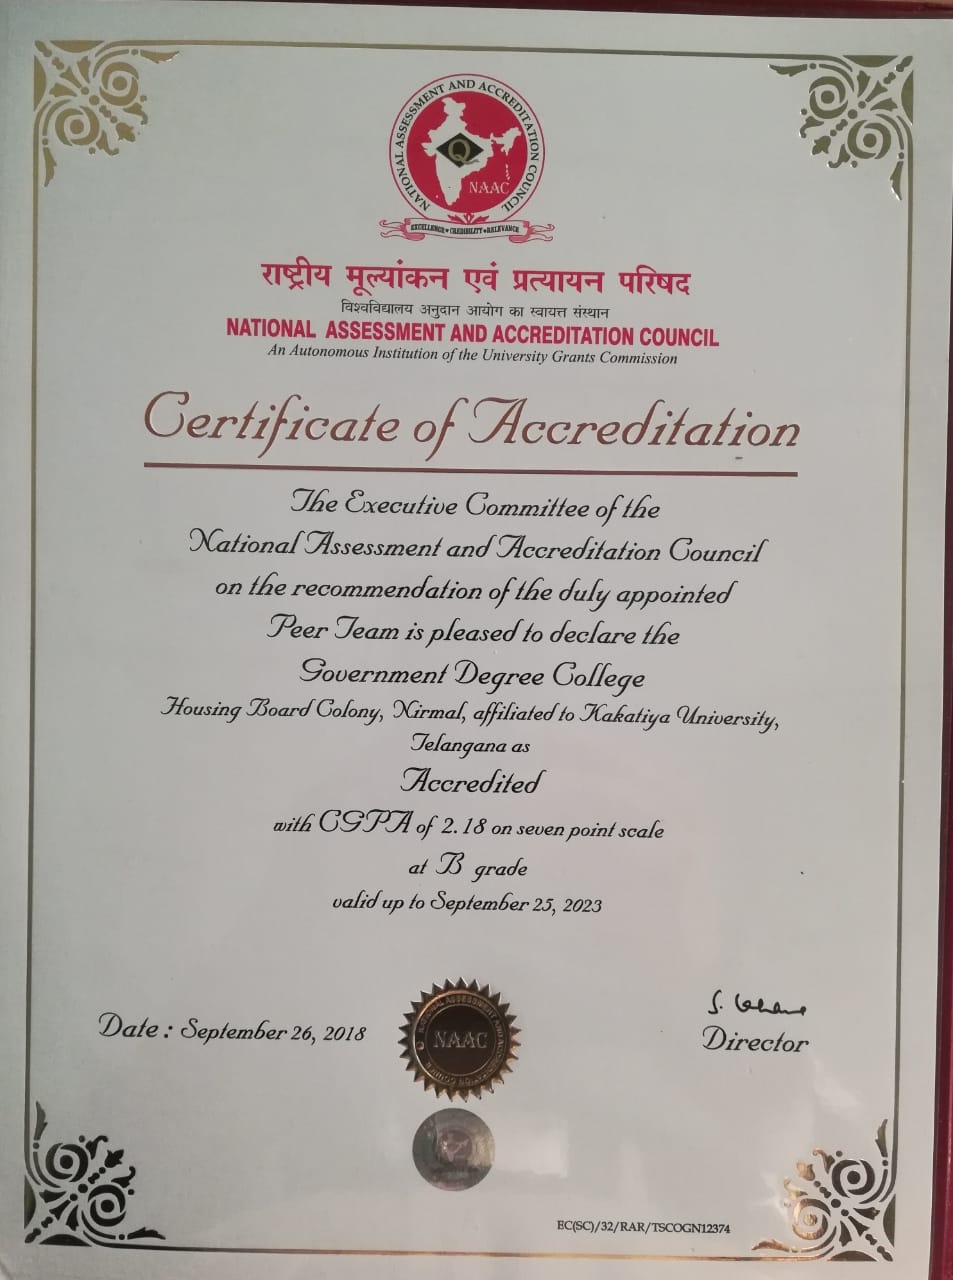 NAAC CYCLE 3 CERTIFICATE